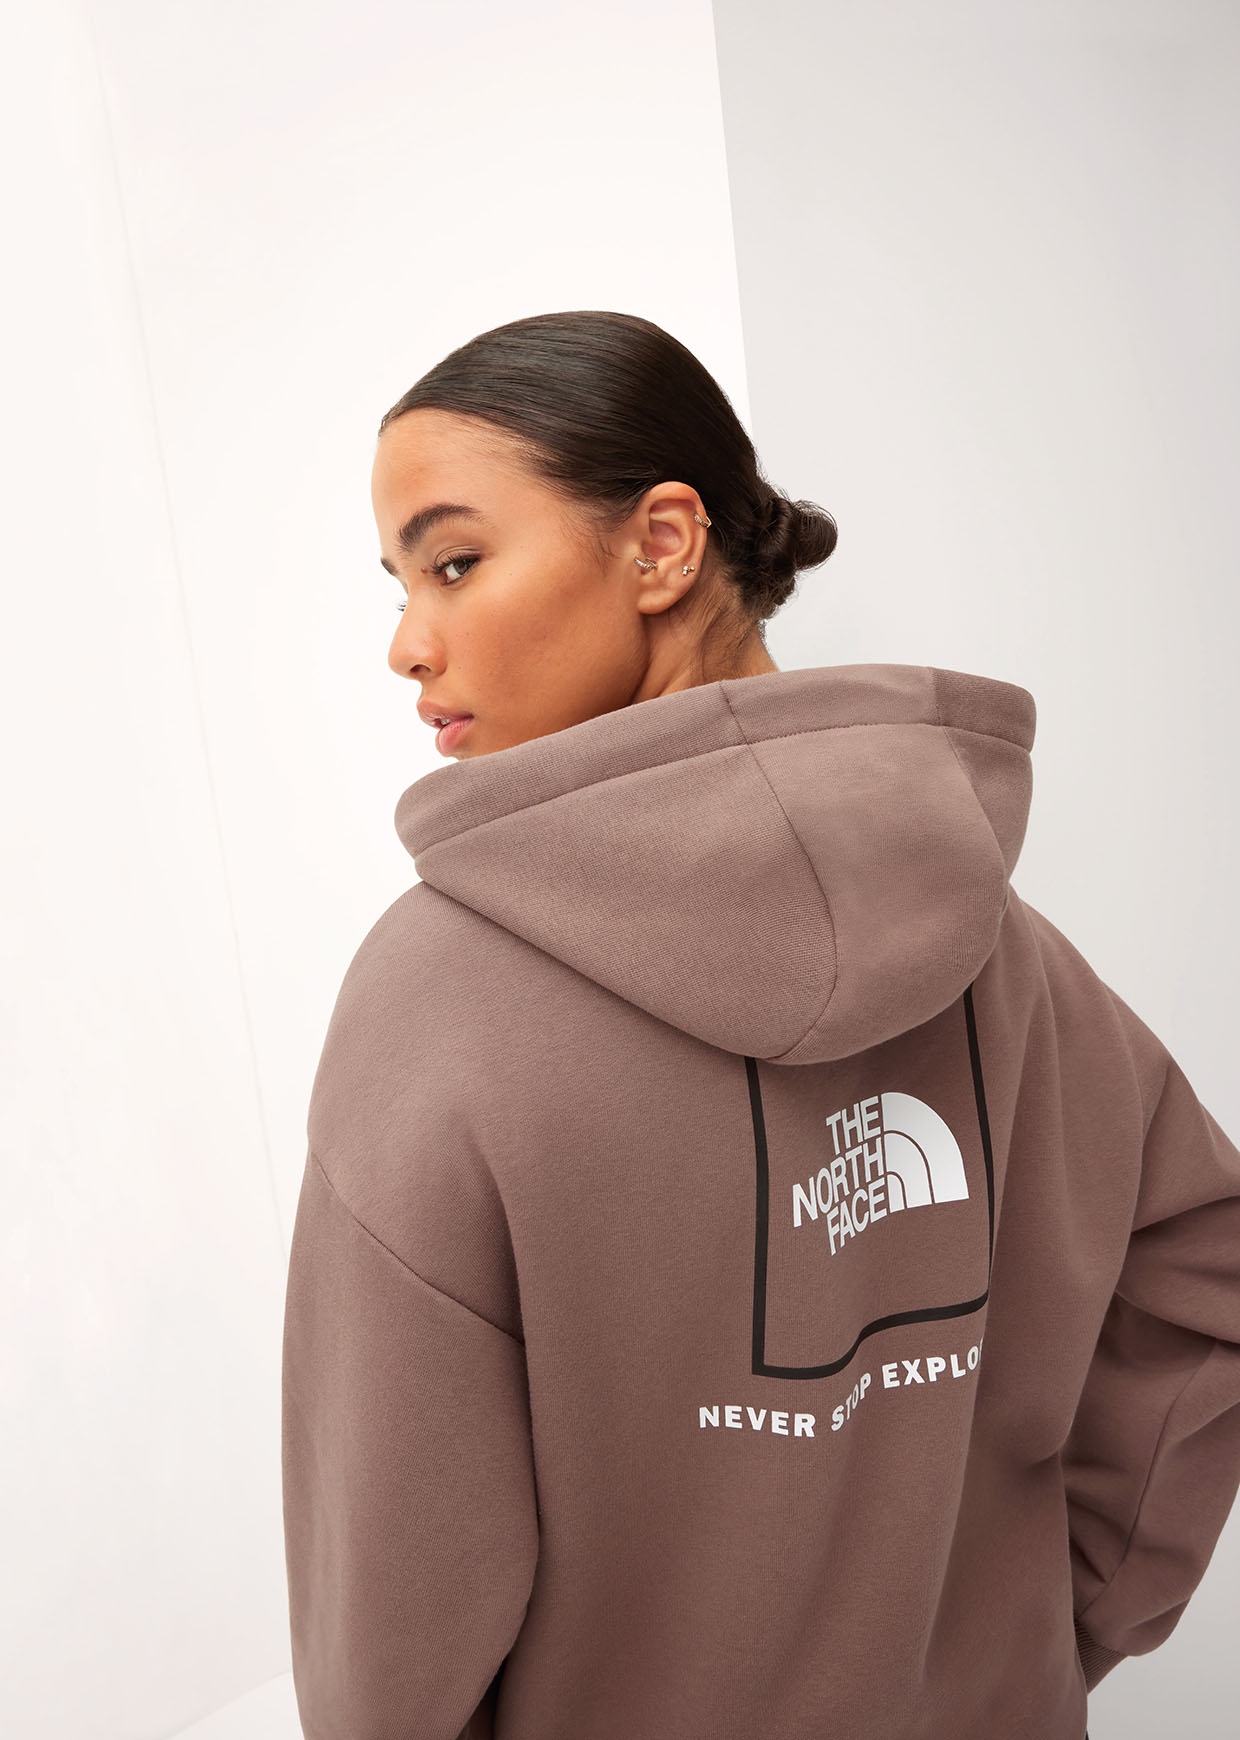 Young woman wearing a brown North Face hoodie